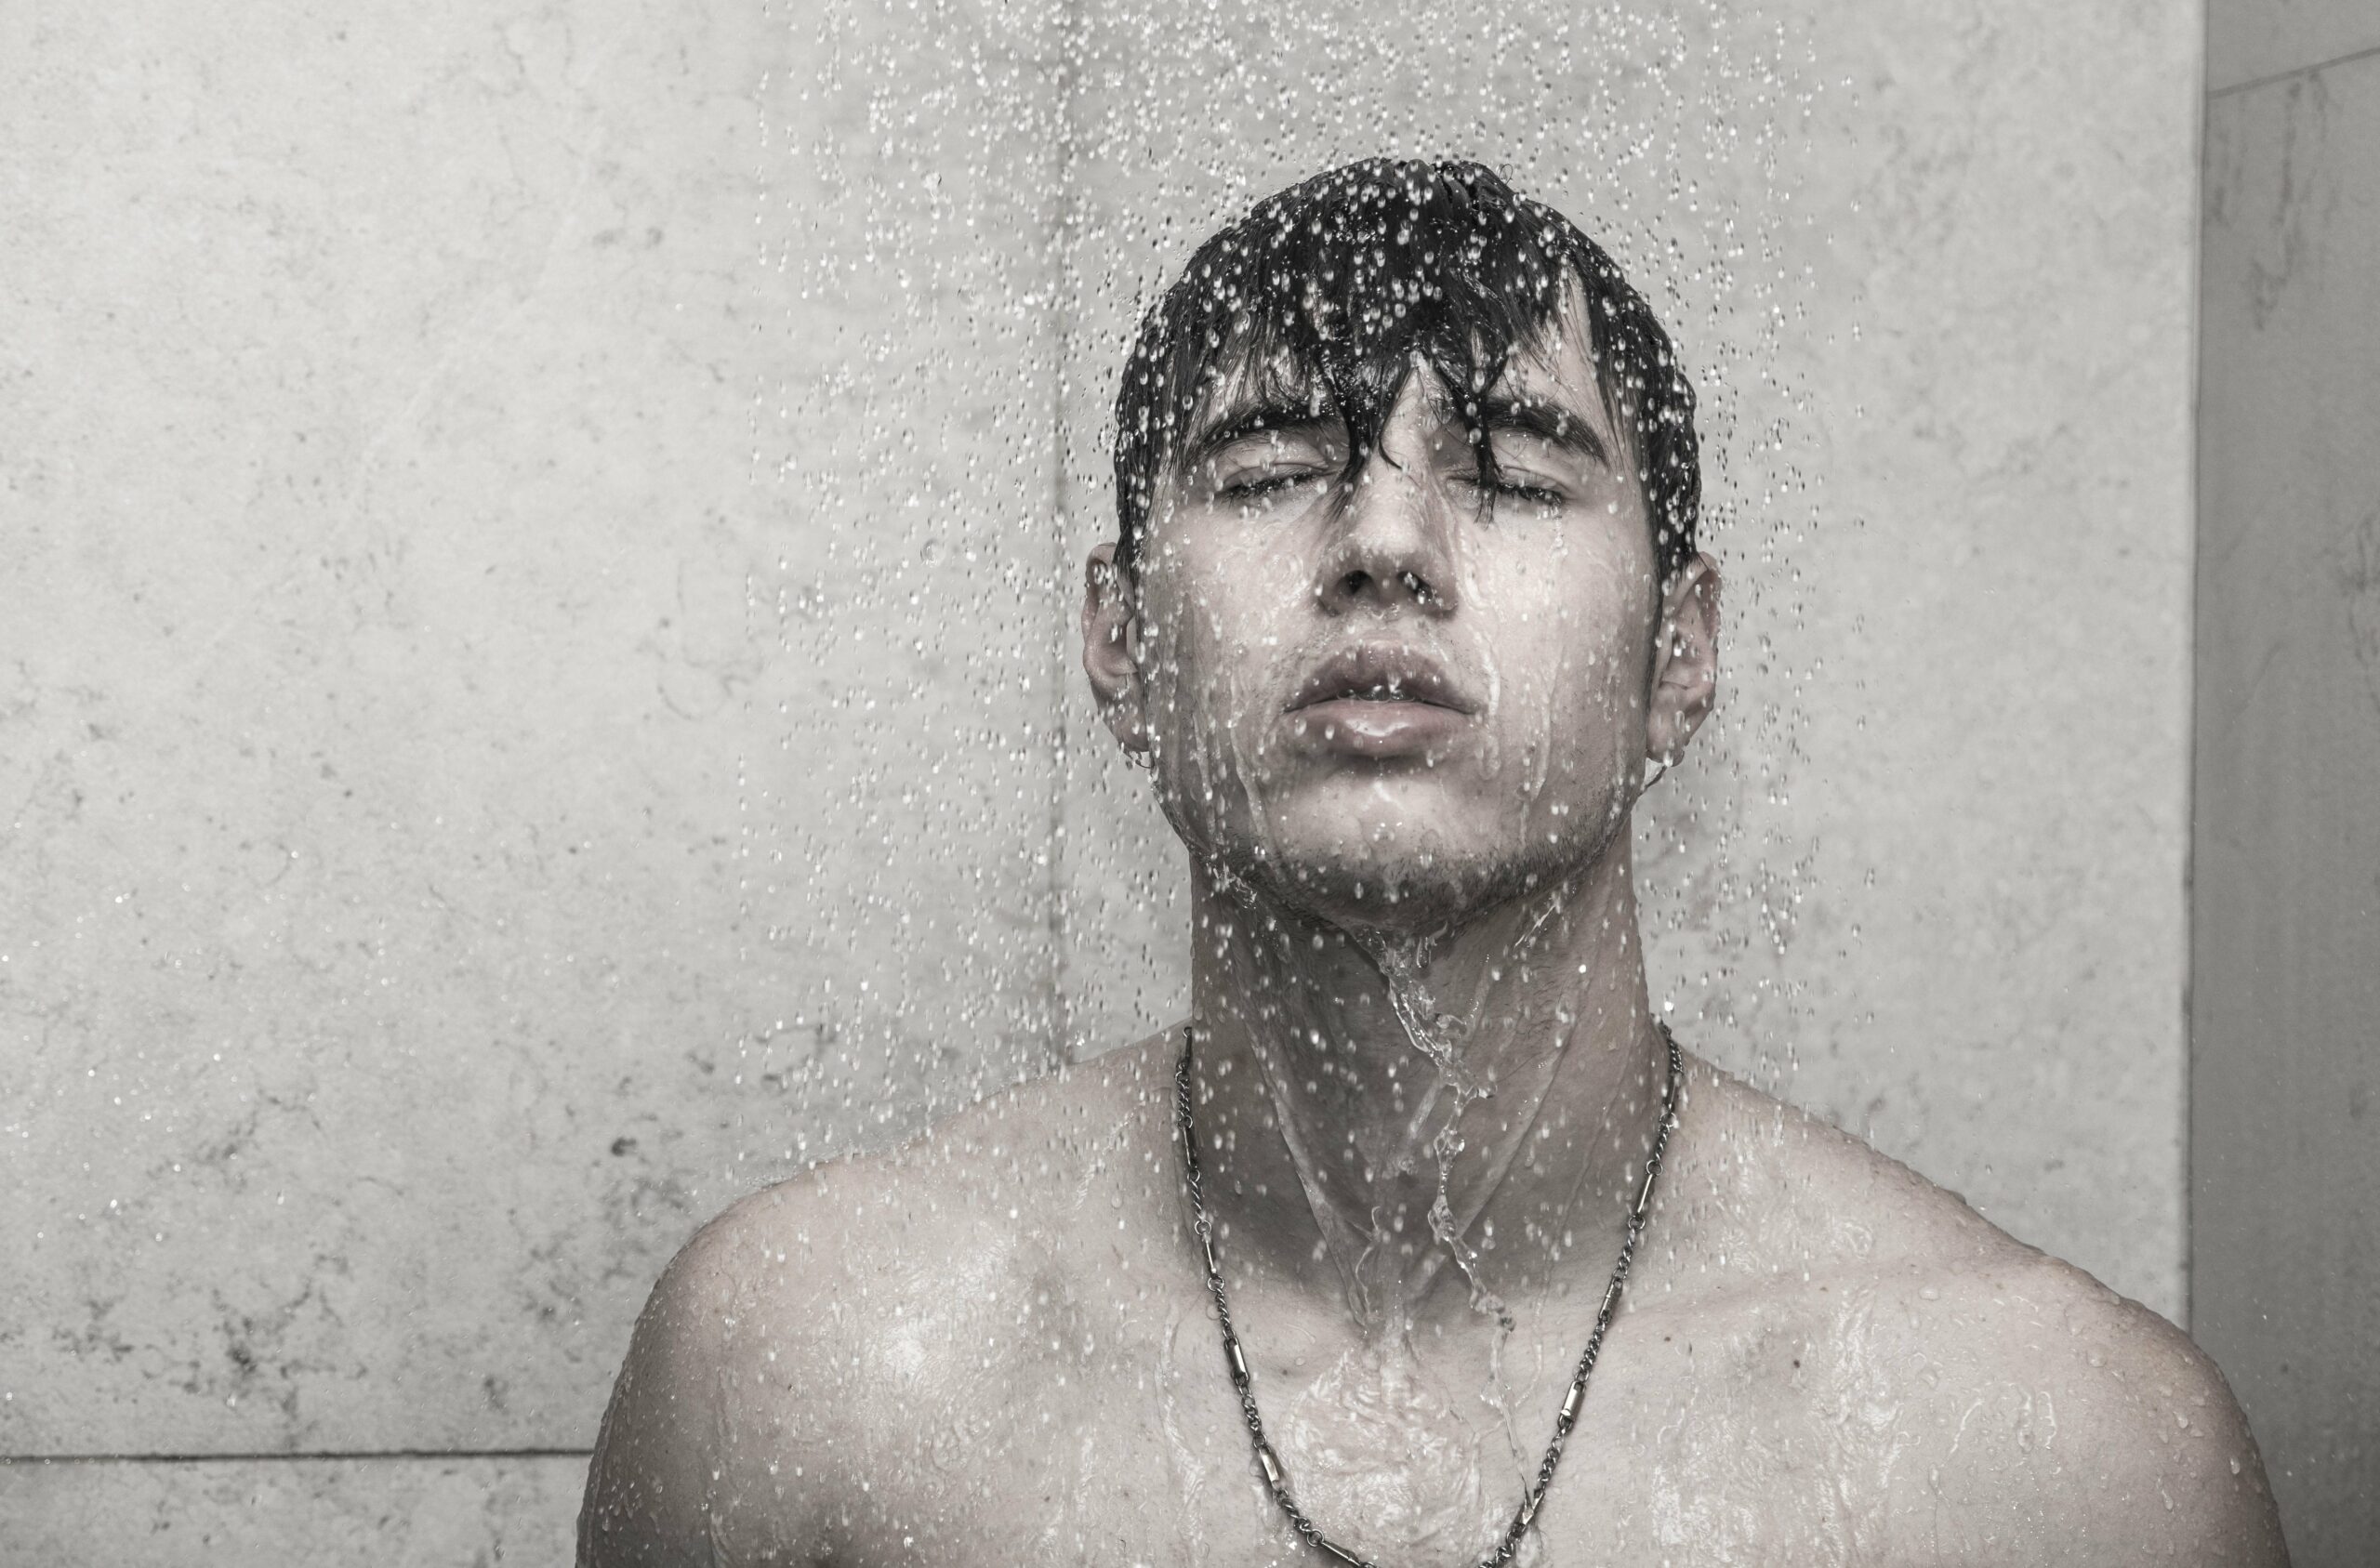 What Are the Risks Posed by Bad Practices in The Shower (1)